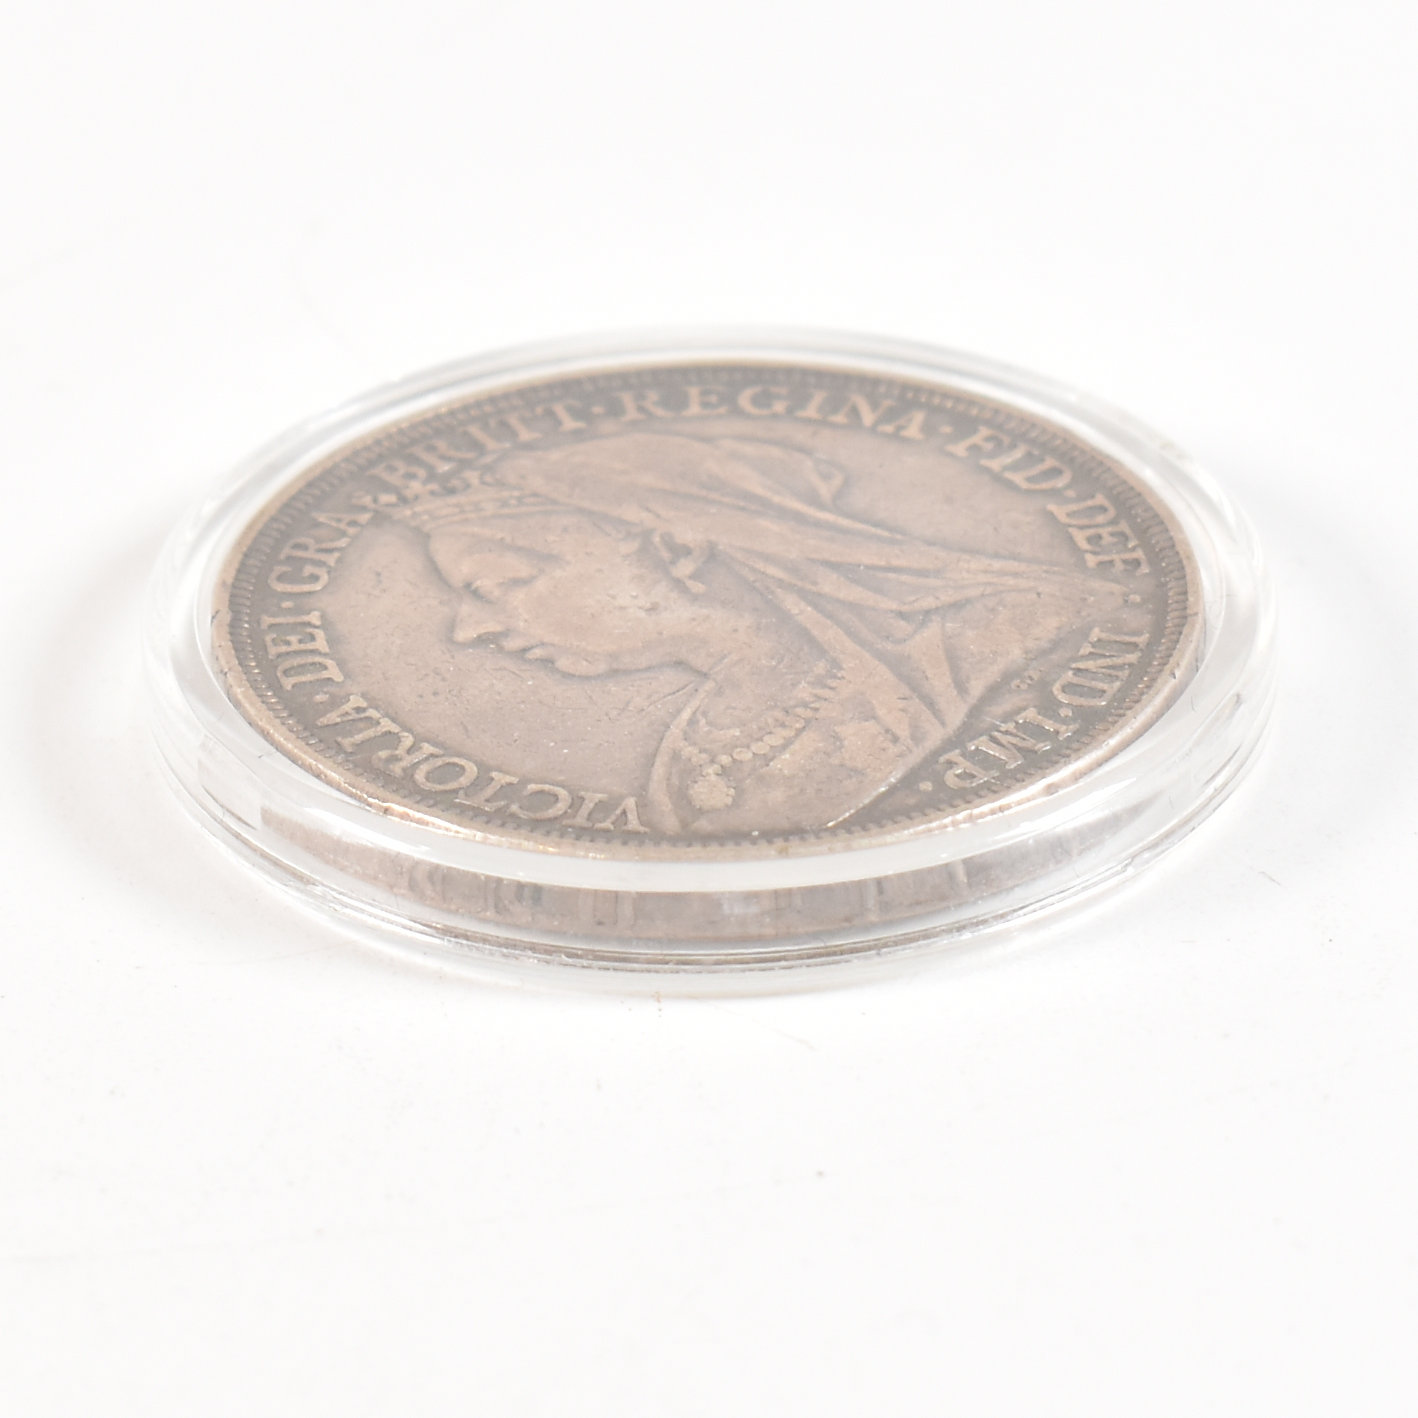 CASED 1895 SILVER CROWN COIN VICTORIA - Image 2 of 4